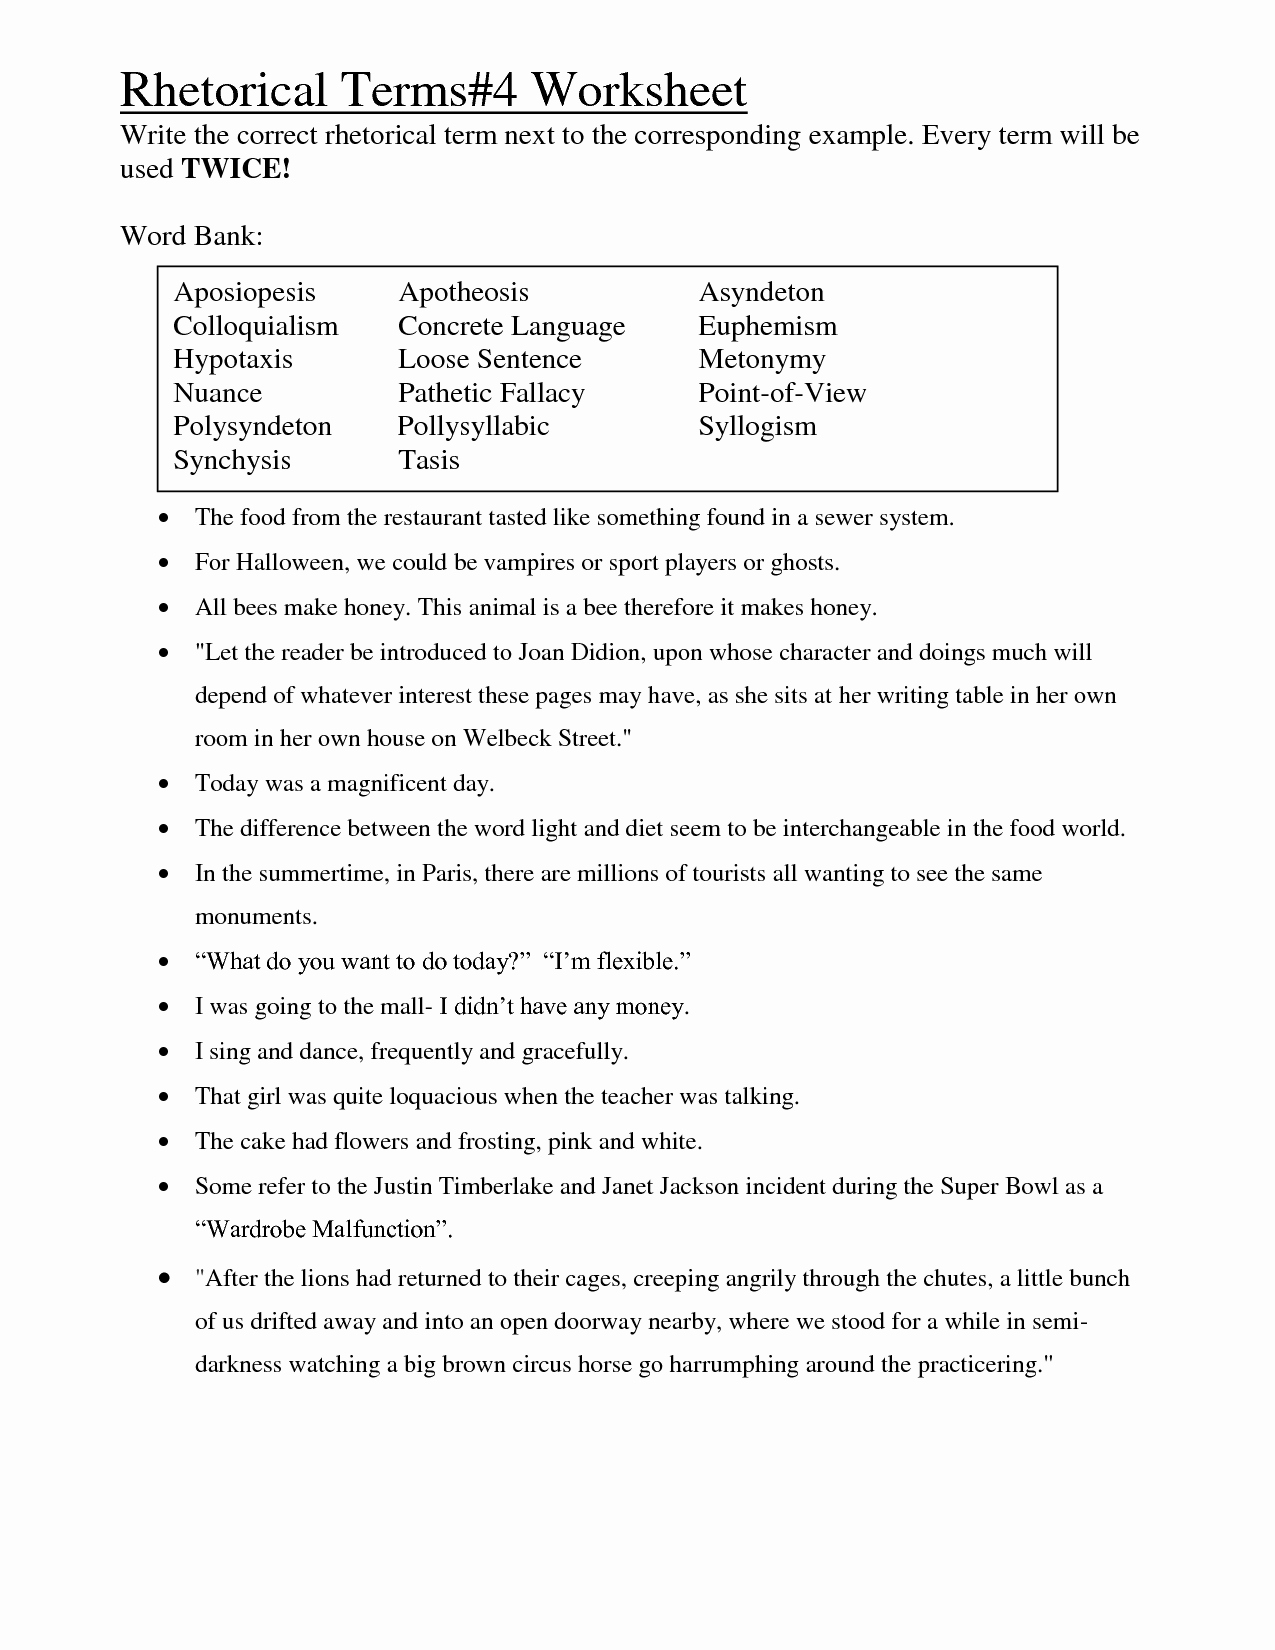 Logical Fallacies Worksheet with Answers Lovely 15 Best Of Logical Fallacies Worksheet Cnu